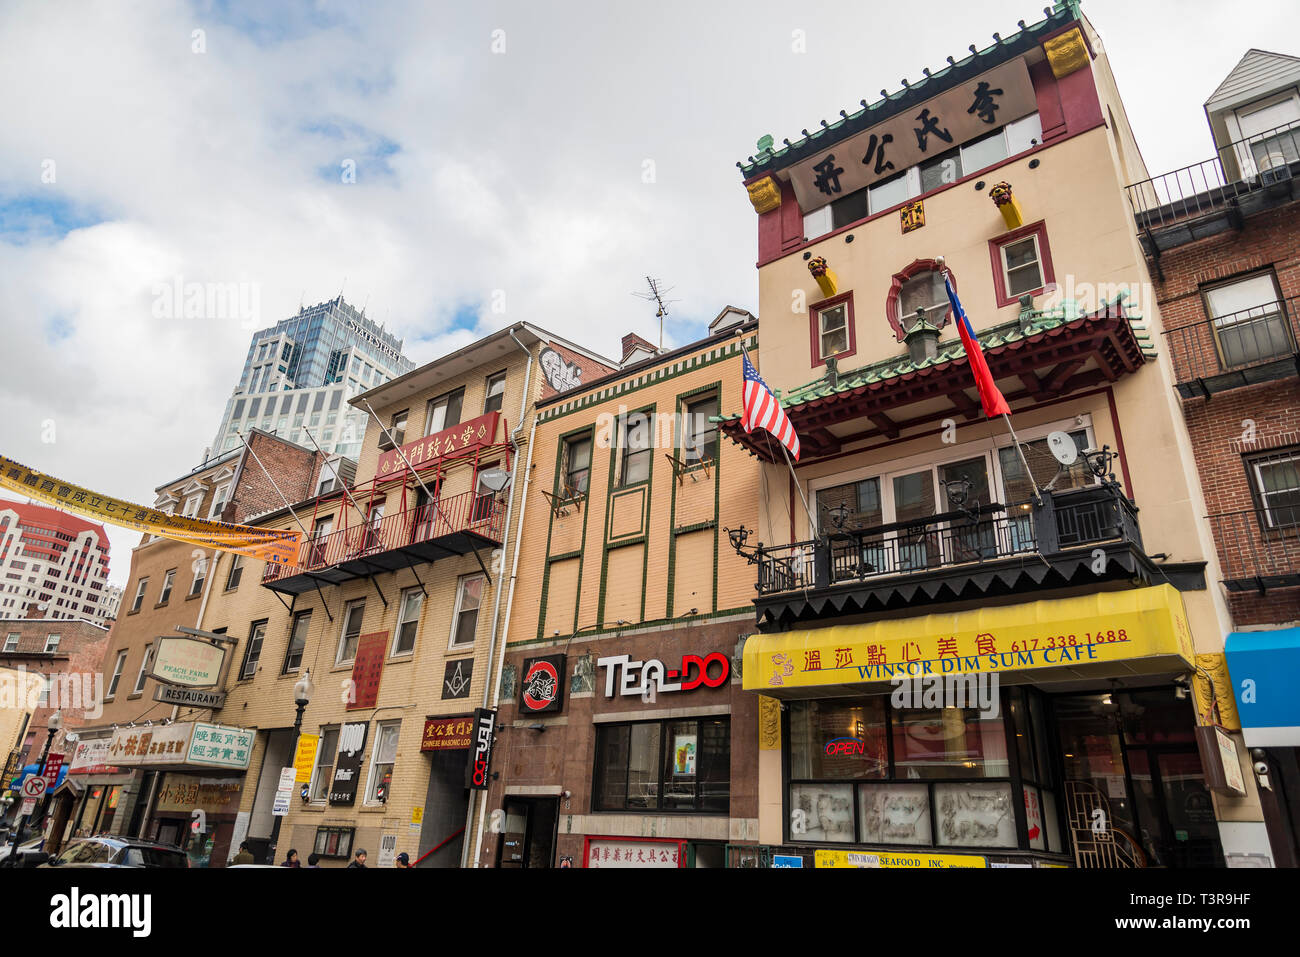 Boston's Chinatown is the only surviving Chinatown district in New England region of United States. Stock Photo